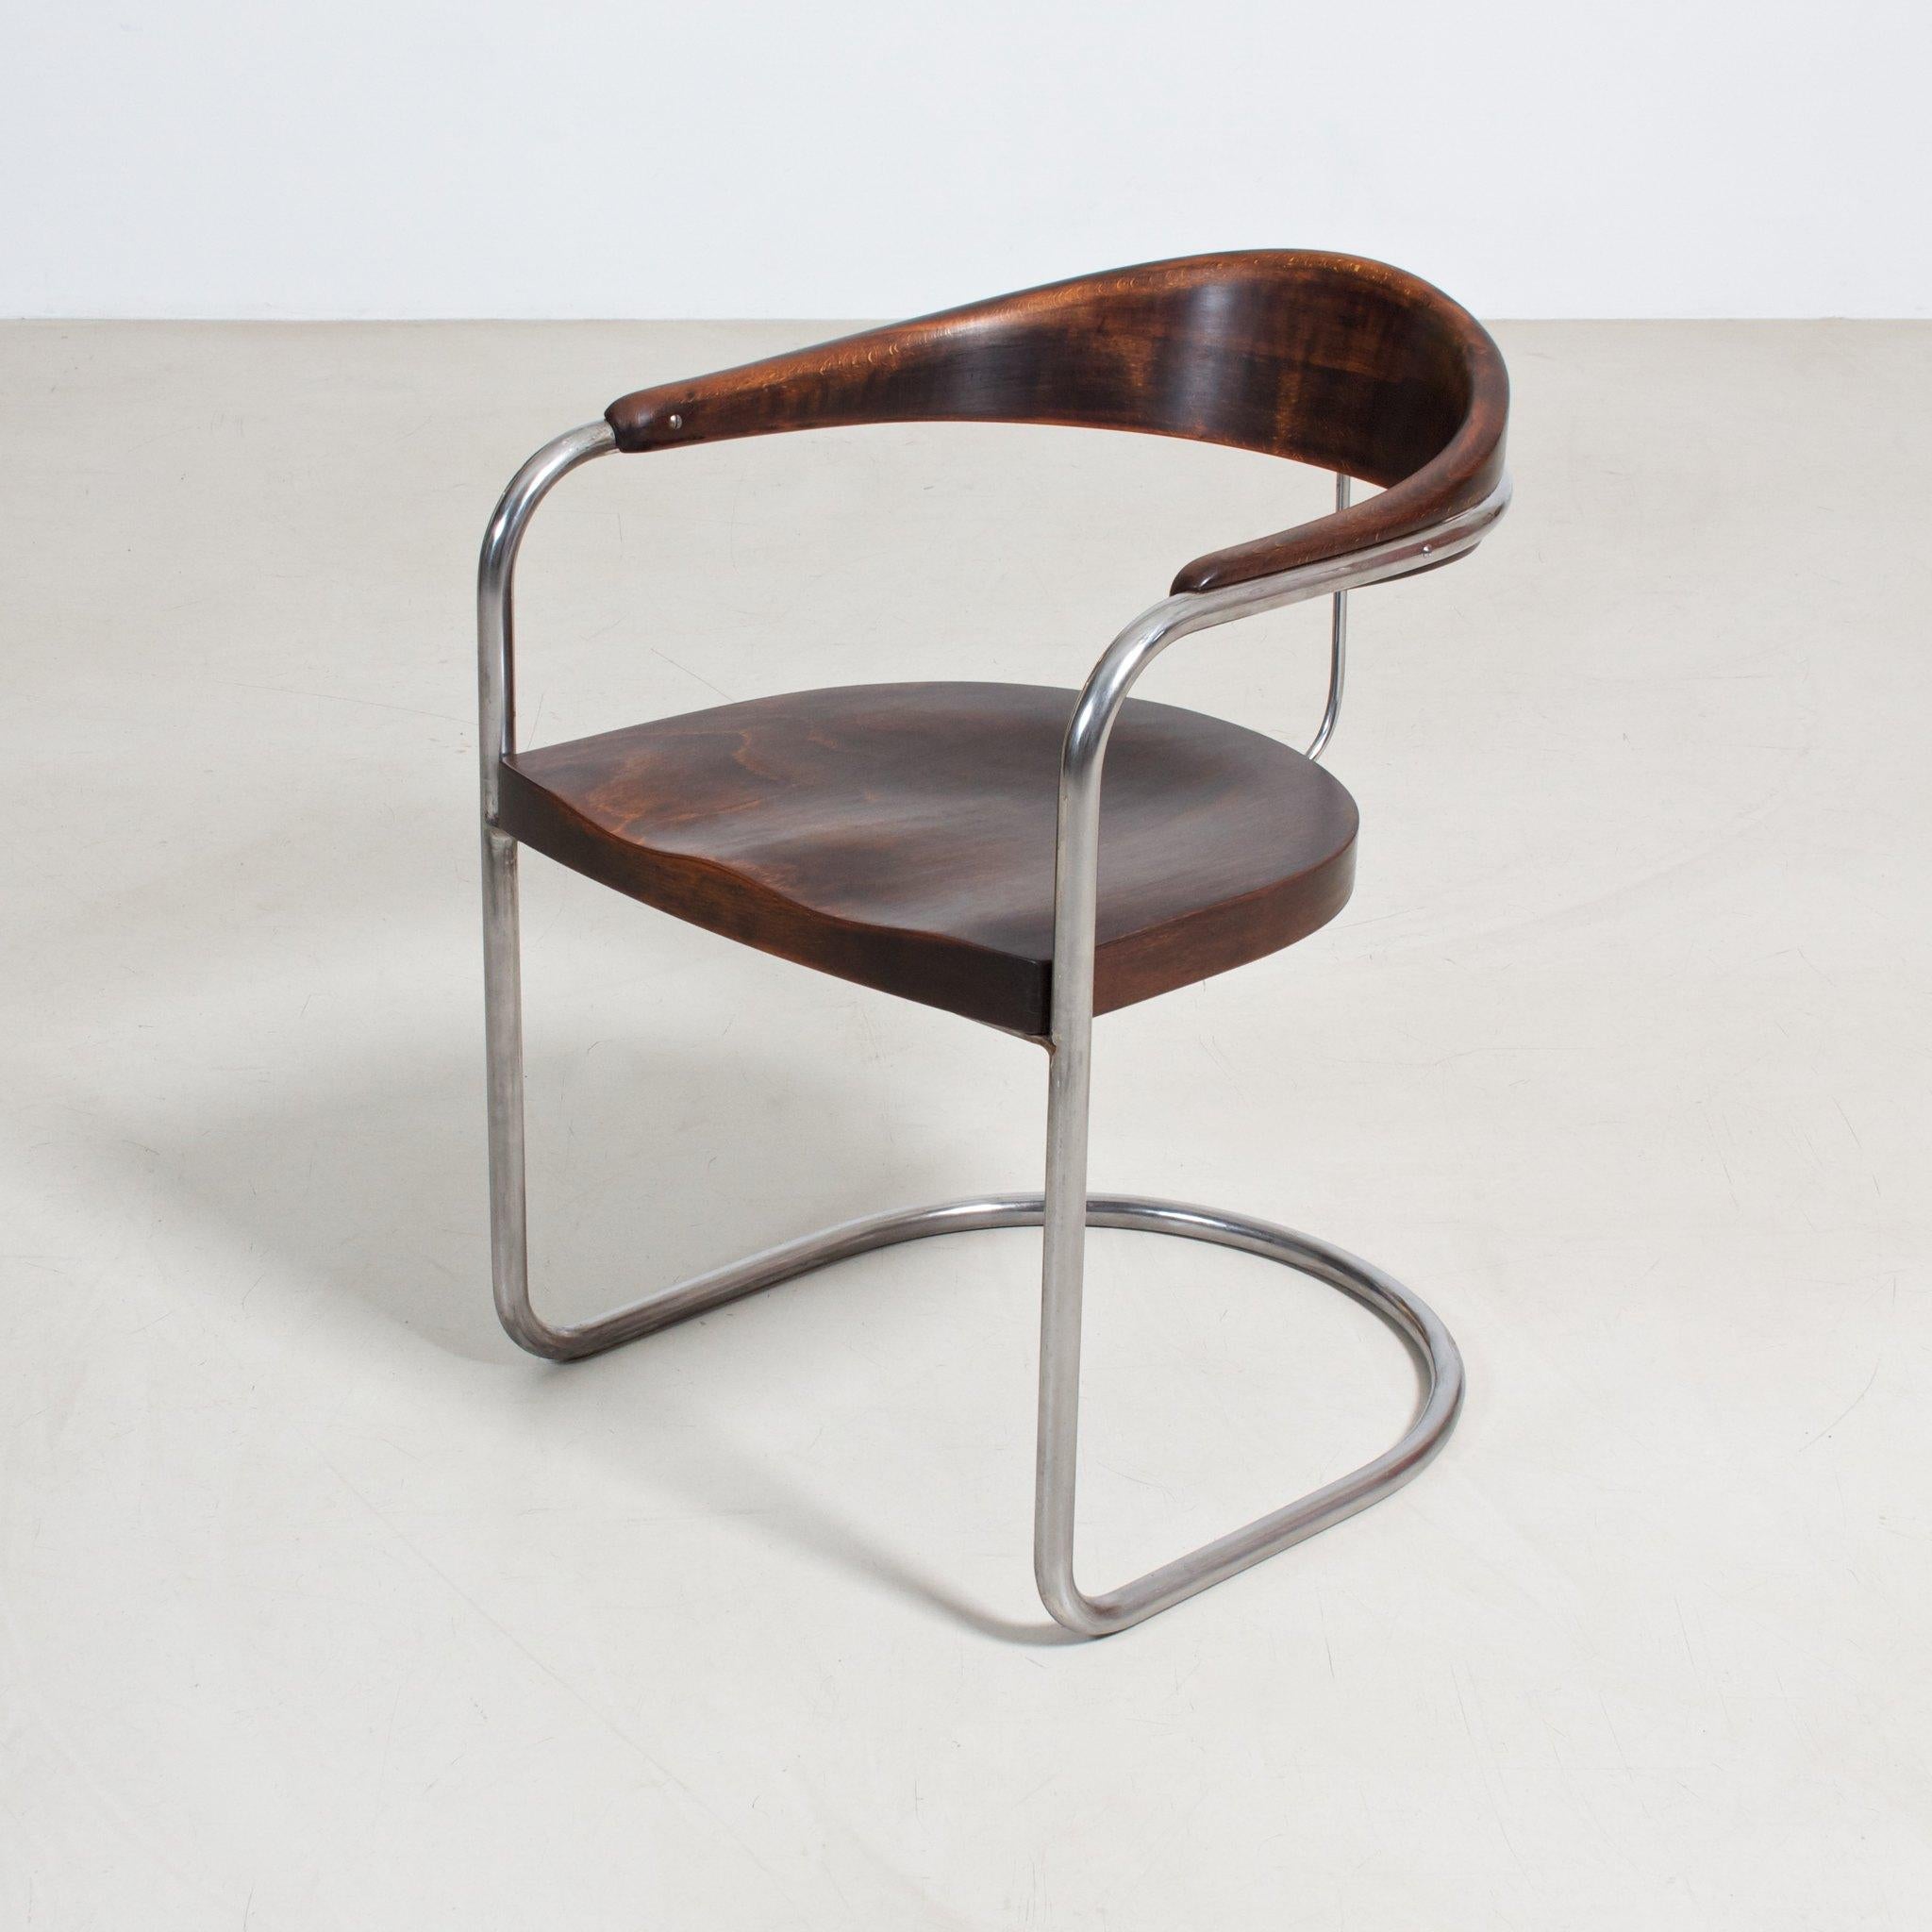 German Bauhaus Cantilever Armchair by Luckhardt Brothers, Chromed Metal, Stained Wood For Sale